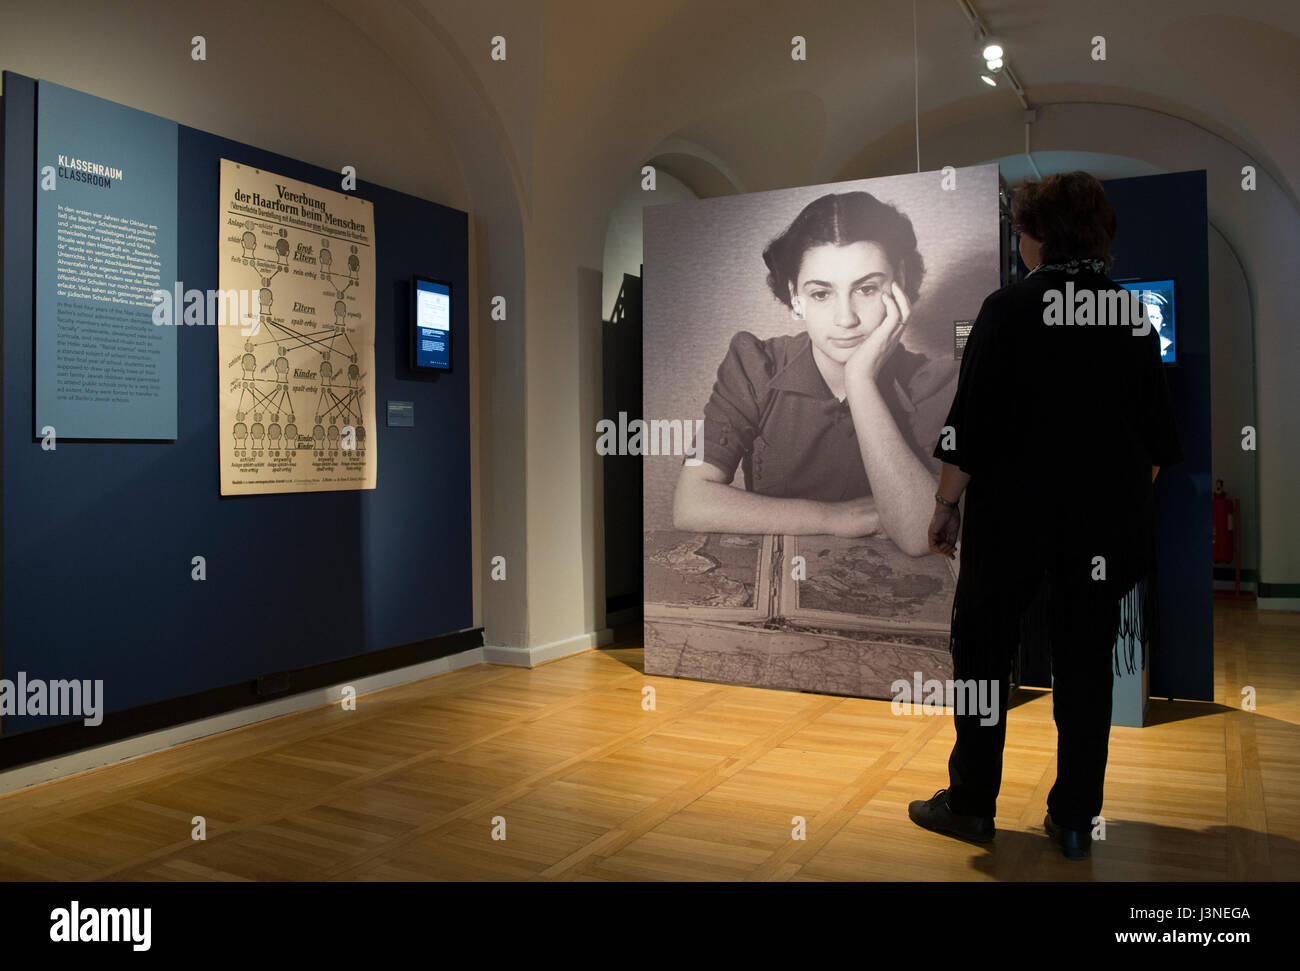 Berlin, Germany. 03rd May, 2017. A visitor stands in front of partition walls in the Maerkisches Museum (Marcher Museum) in Berlin, Germany, 03 May 2017. They are part of the exhibition 'Berlin 1937. In the shadow of tomorrow', which showcases items from that era, historical photographs, documents and film clips to illustrate life in the German capital of Berlin under the Nazi regime prior to World War II. Photo: Paul Zinken/dpa/Alamy Live News Stock Photo